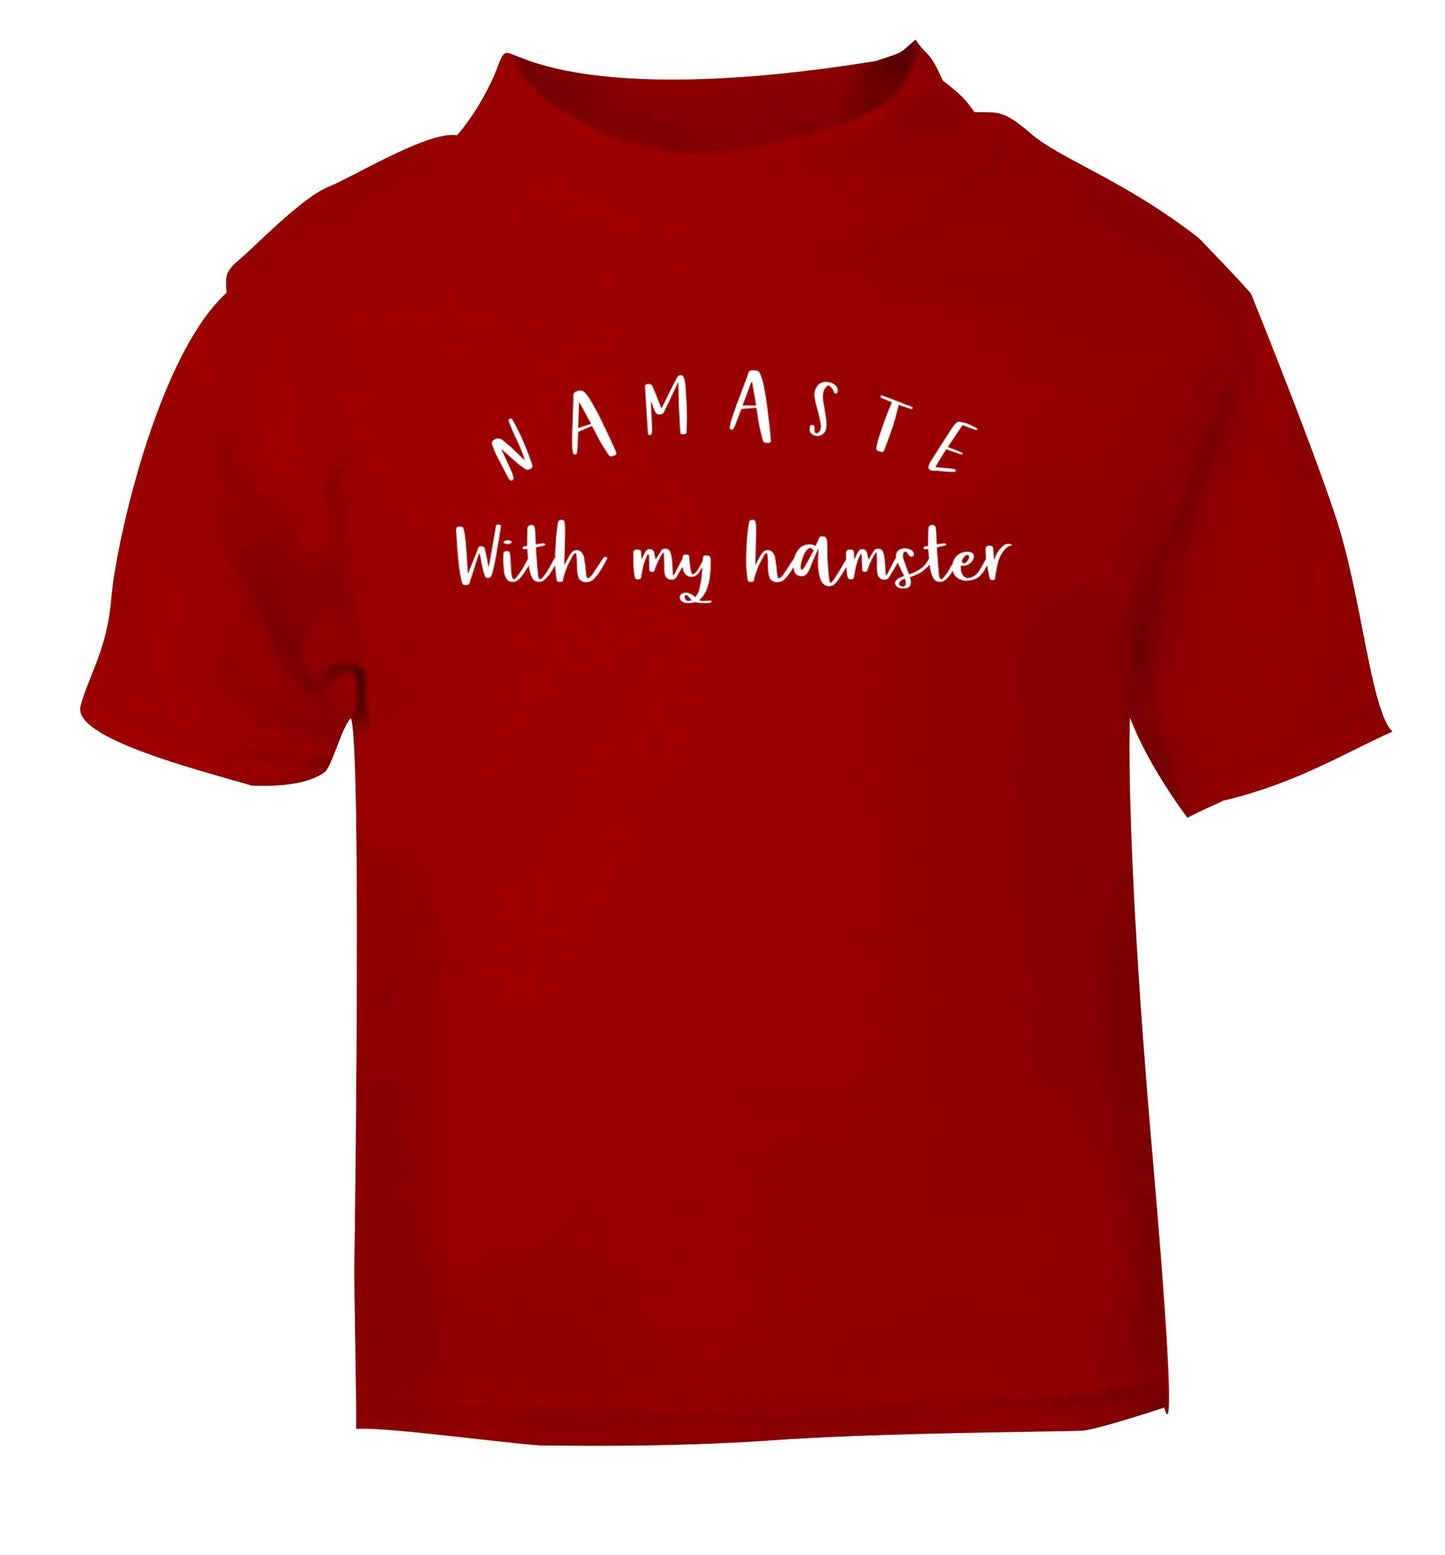 Namaste with my hamster red Baby Toddler Tshirt 2 Years